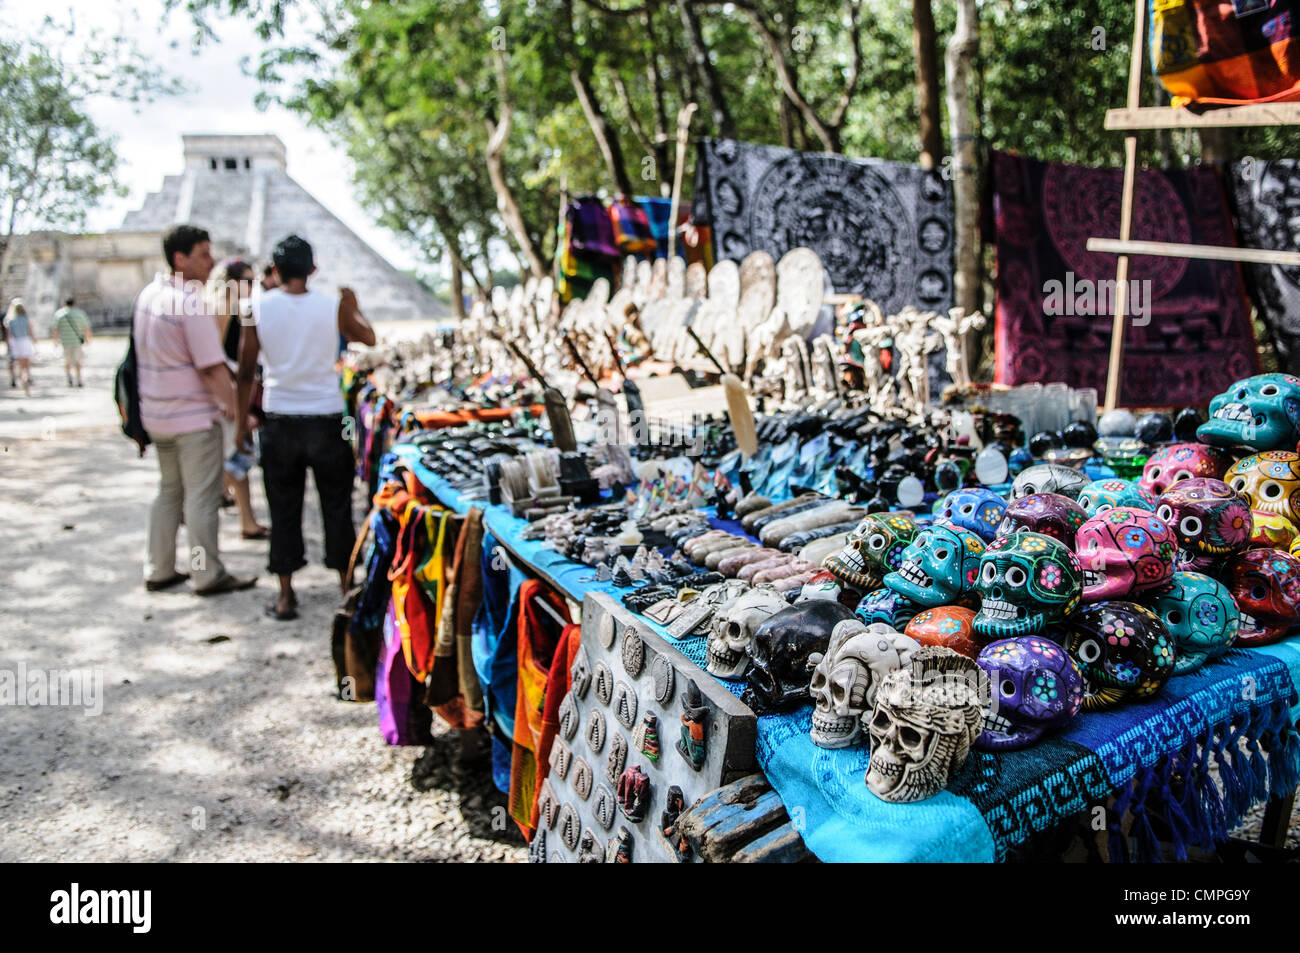 CHICHEN ITZA, Mexico - Market stalls selling local souvenirs and handicrafts to tourists visiting Chichen Itza Mayan ruins archeological site in Mexico, with El Castillo in the background. Stock Photo